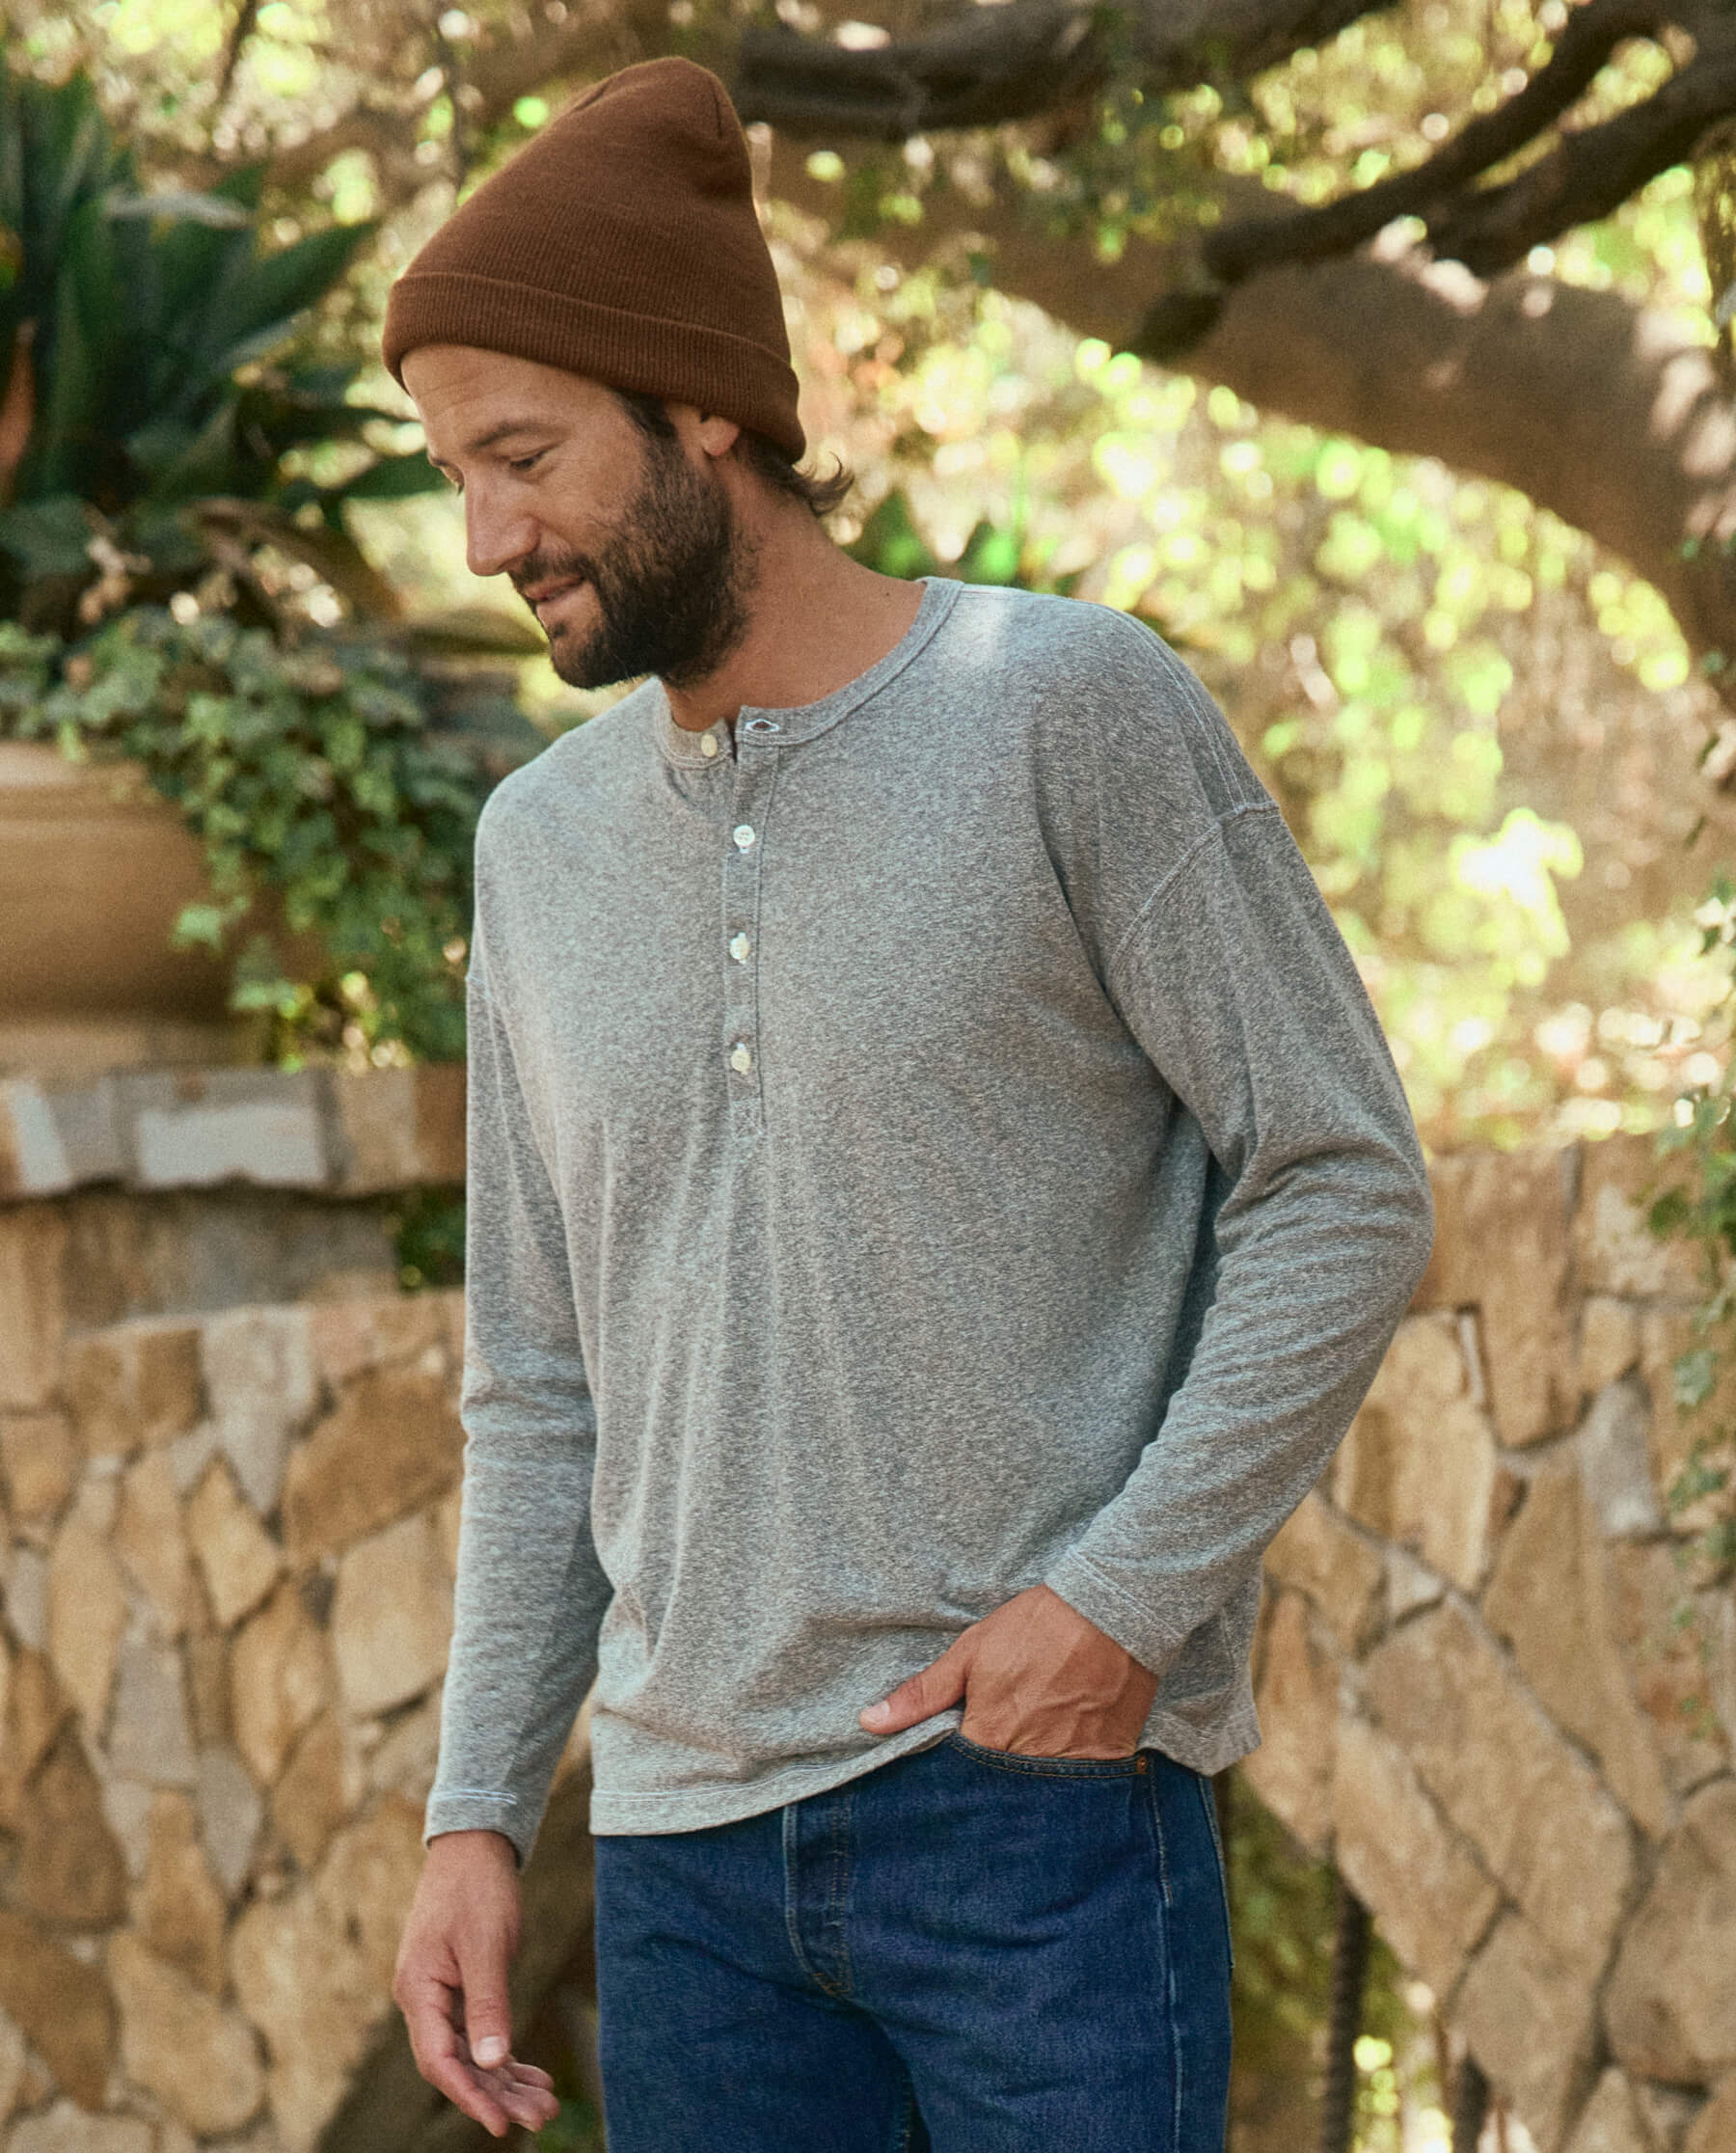 The Men's Slouch Henley. -- Heather Grey TEES THE GREAT. HOL 22 MEN